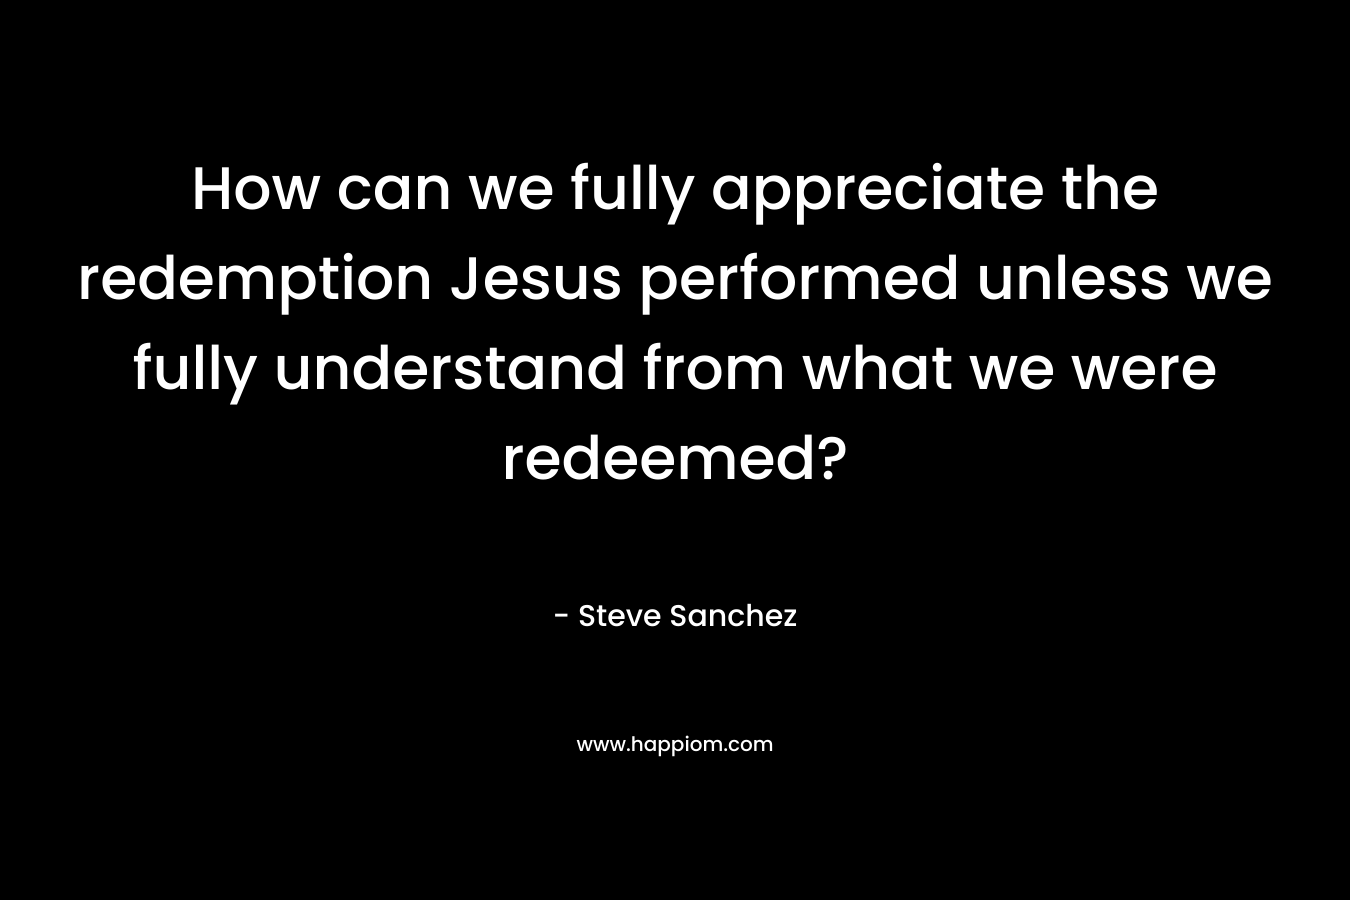 How can we fully appreciate the redemption Jesus performed unless we fully understand from what we were redeemed?